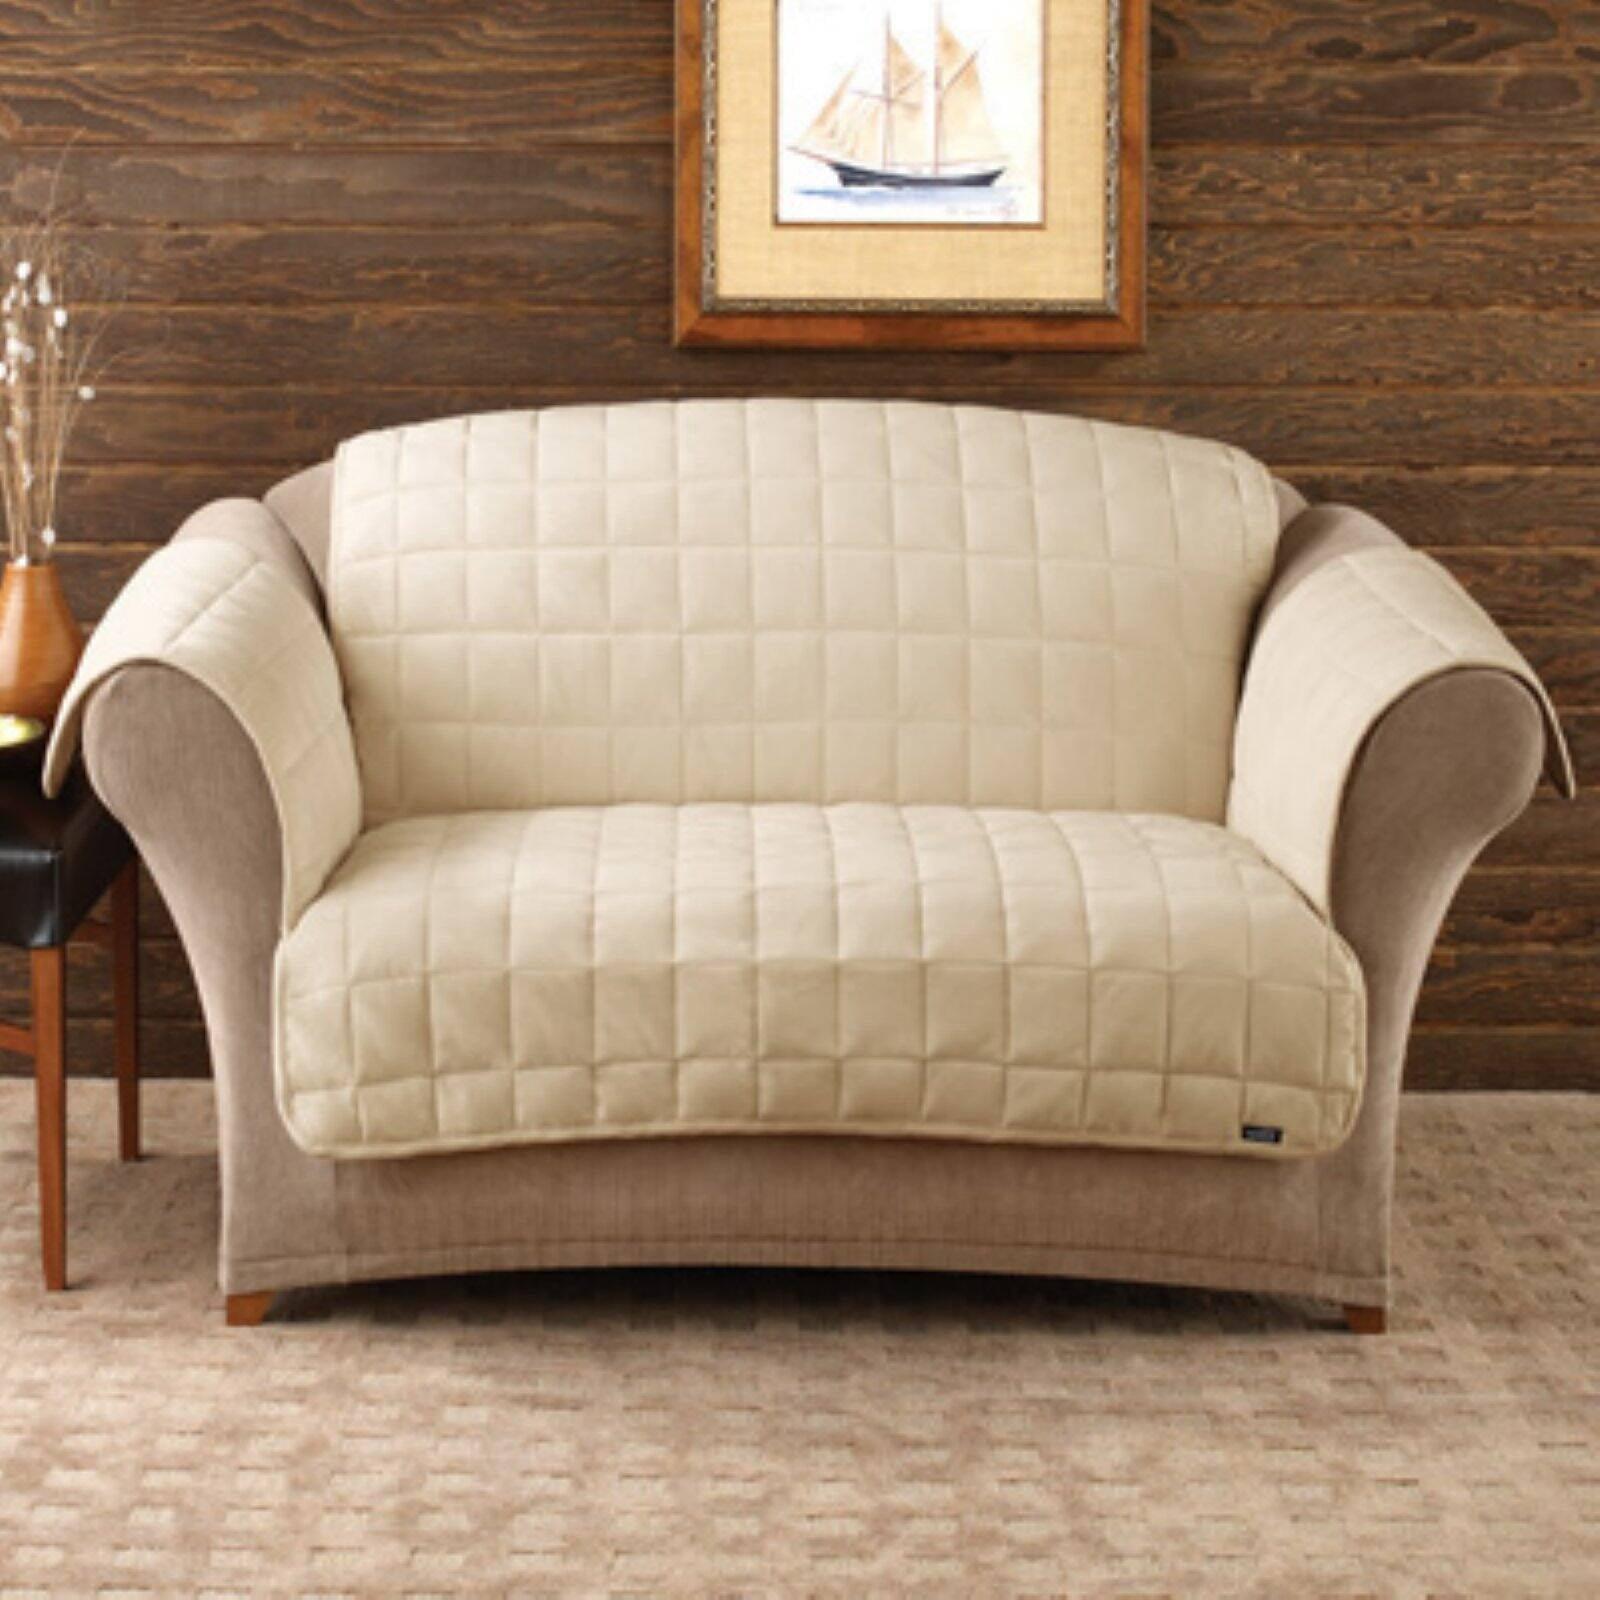 Deluxe Ivory Quilted Velvet Pet Sofa Cover, 76"x50"